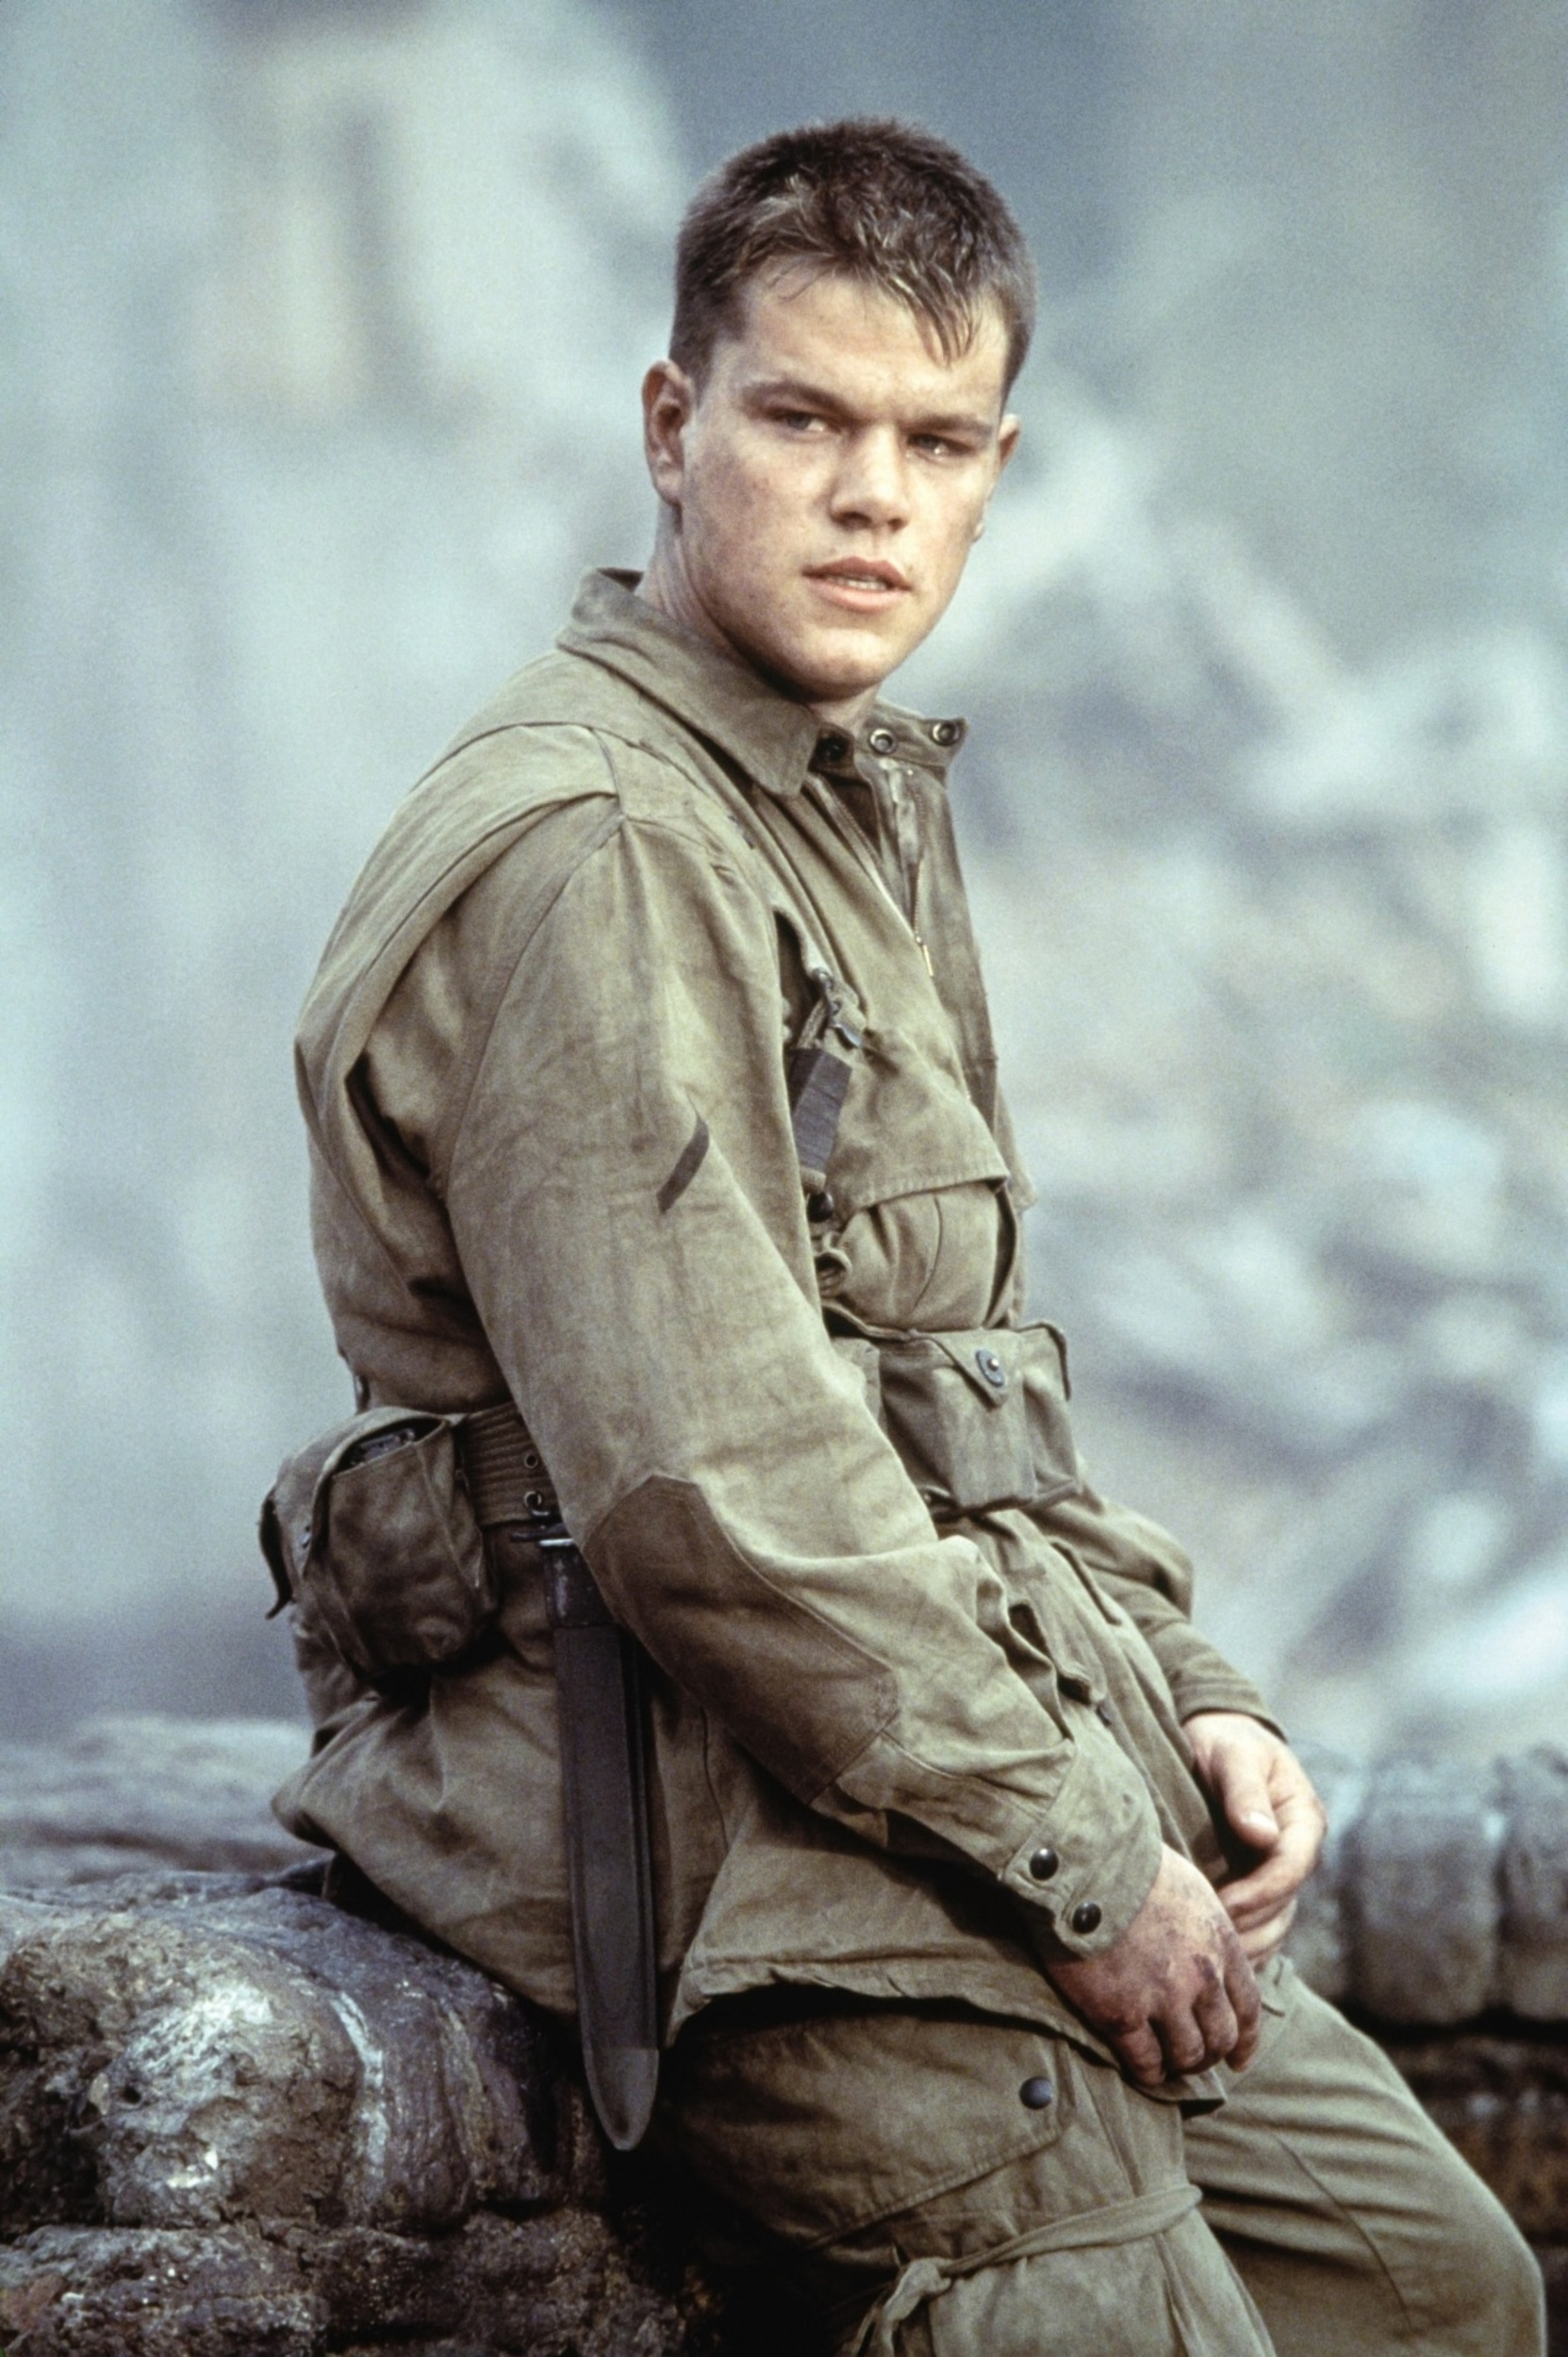 <p>While Damon did train before the film, he did not train alongside his castmates. This was an intentional decision by Spielberg. He did not want Damon to bond with the cast and wanted to create a potential feeling of resentment in the actors playing Captain Miller’s squad. This was to reflect the way the squad felt toward Private Ryan in the film.</p><p>You may also like: <a href='https://www.yardbarker.com/entertainment/articles/the_20_best_movies_and_tv_about_lgbtq_history_040424/s1__39634516'>The 20 best movies and TV about LGBTQ+ history</a></p>